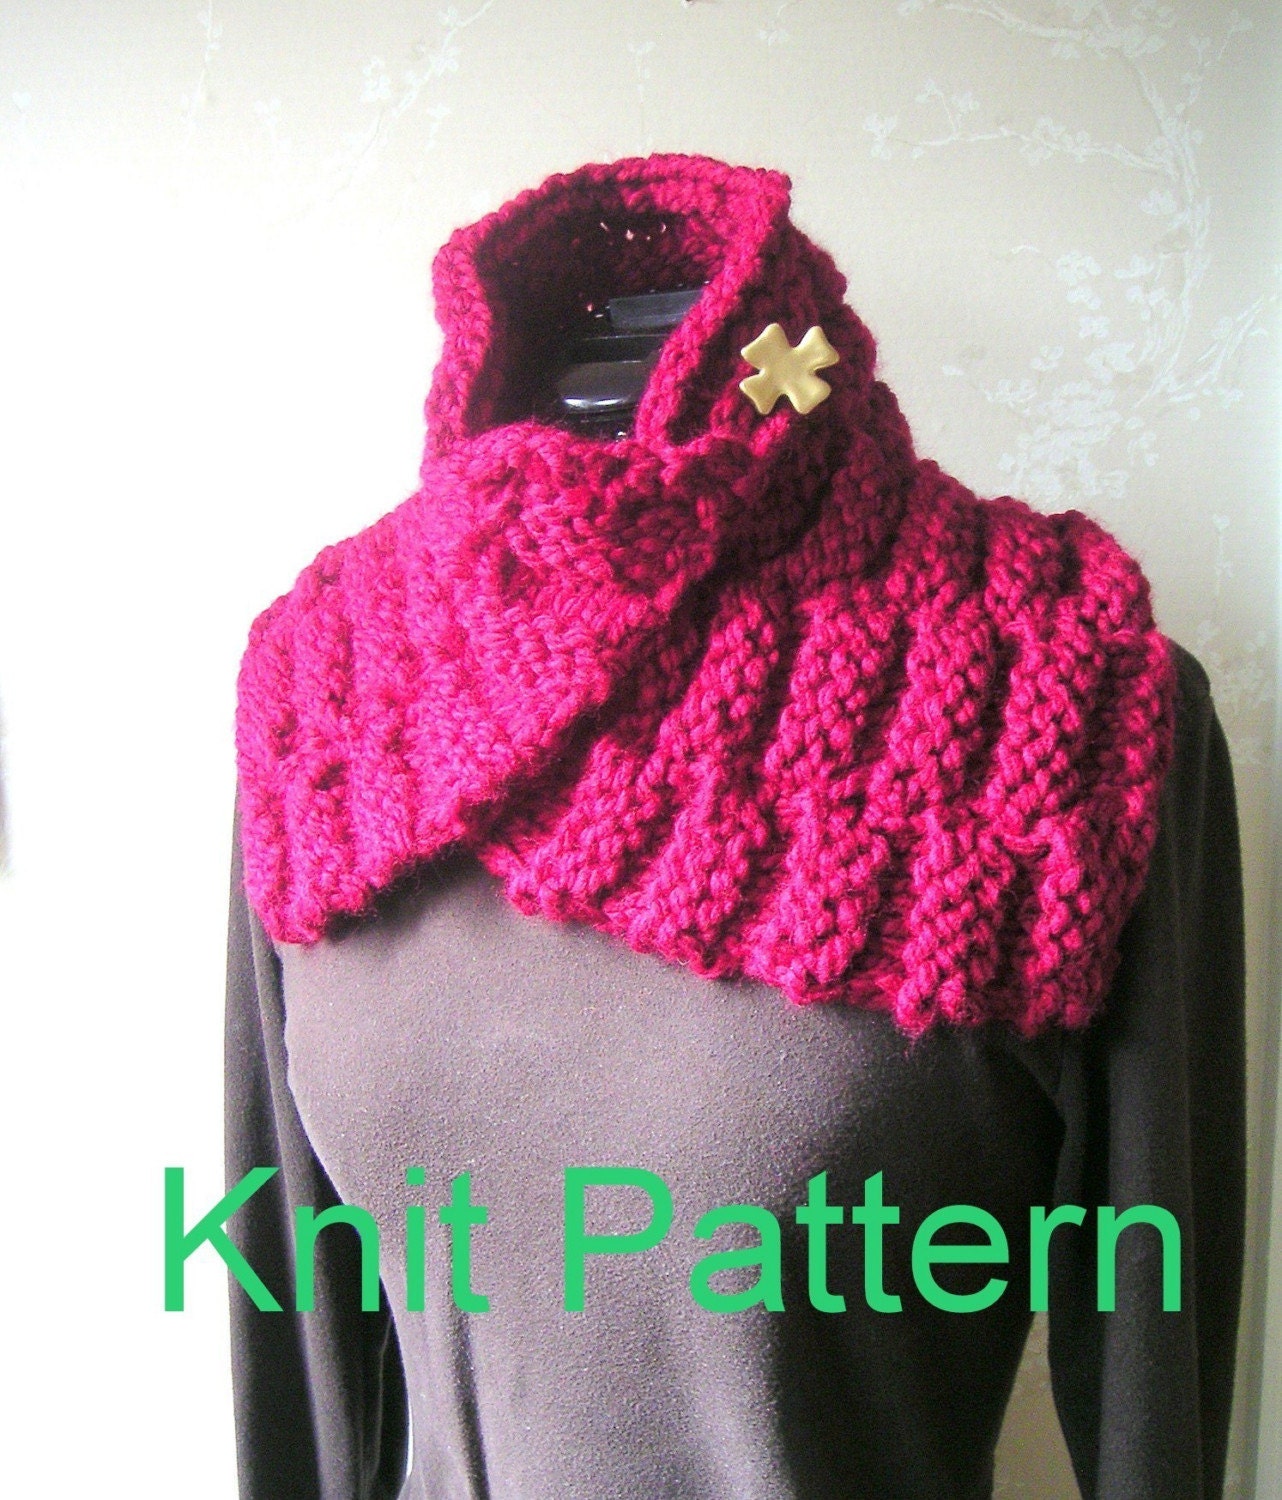 how to knit a scarf for beginners